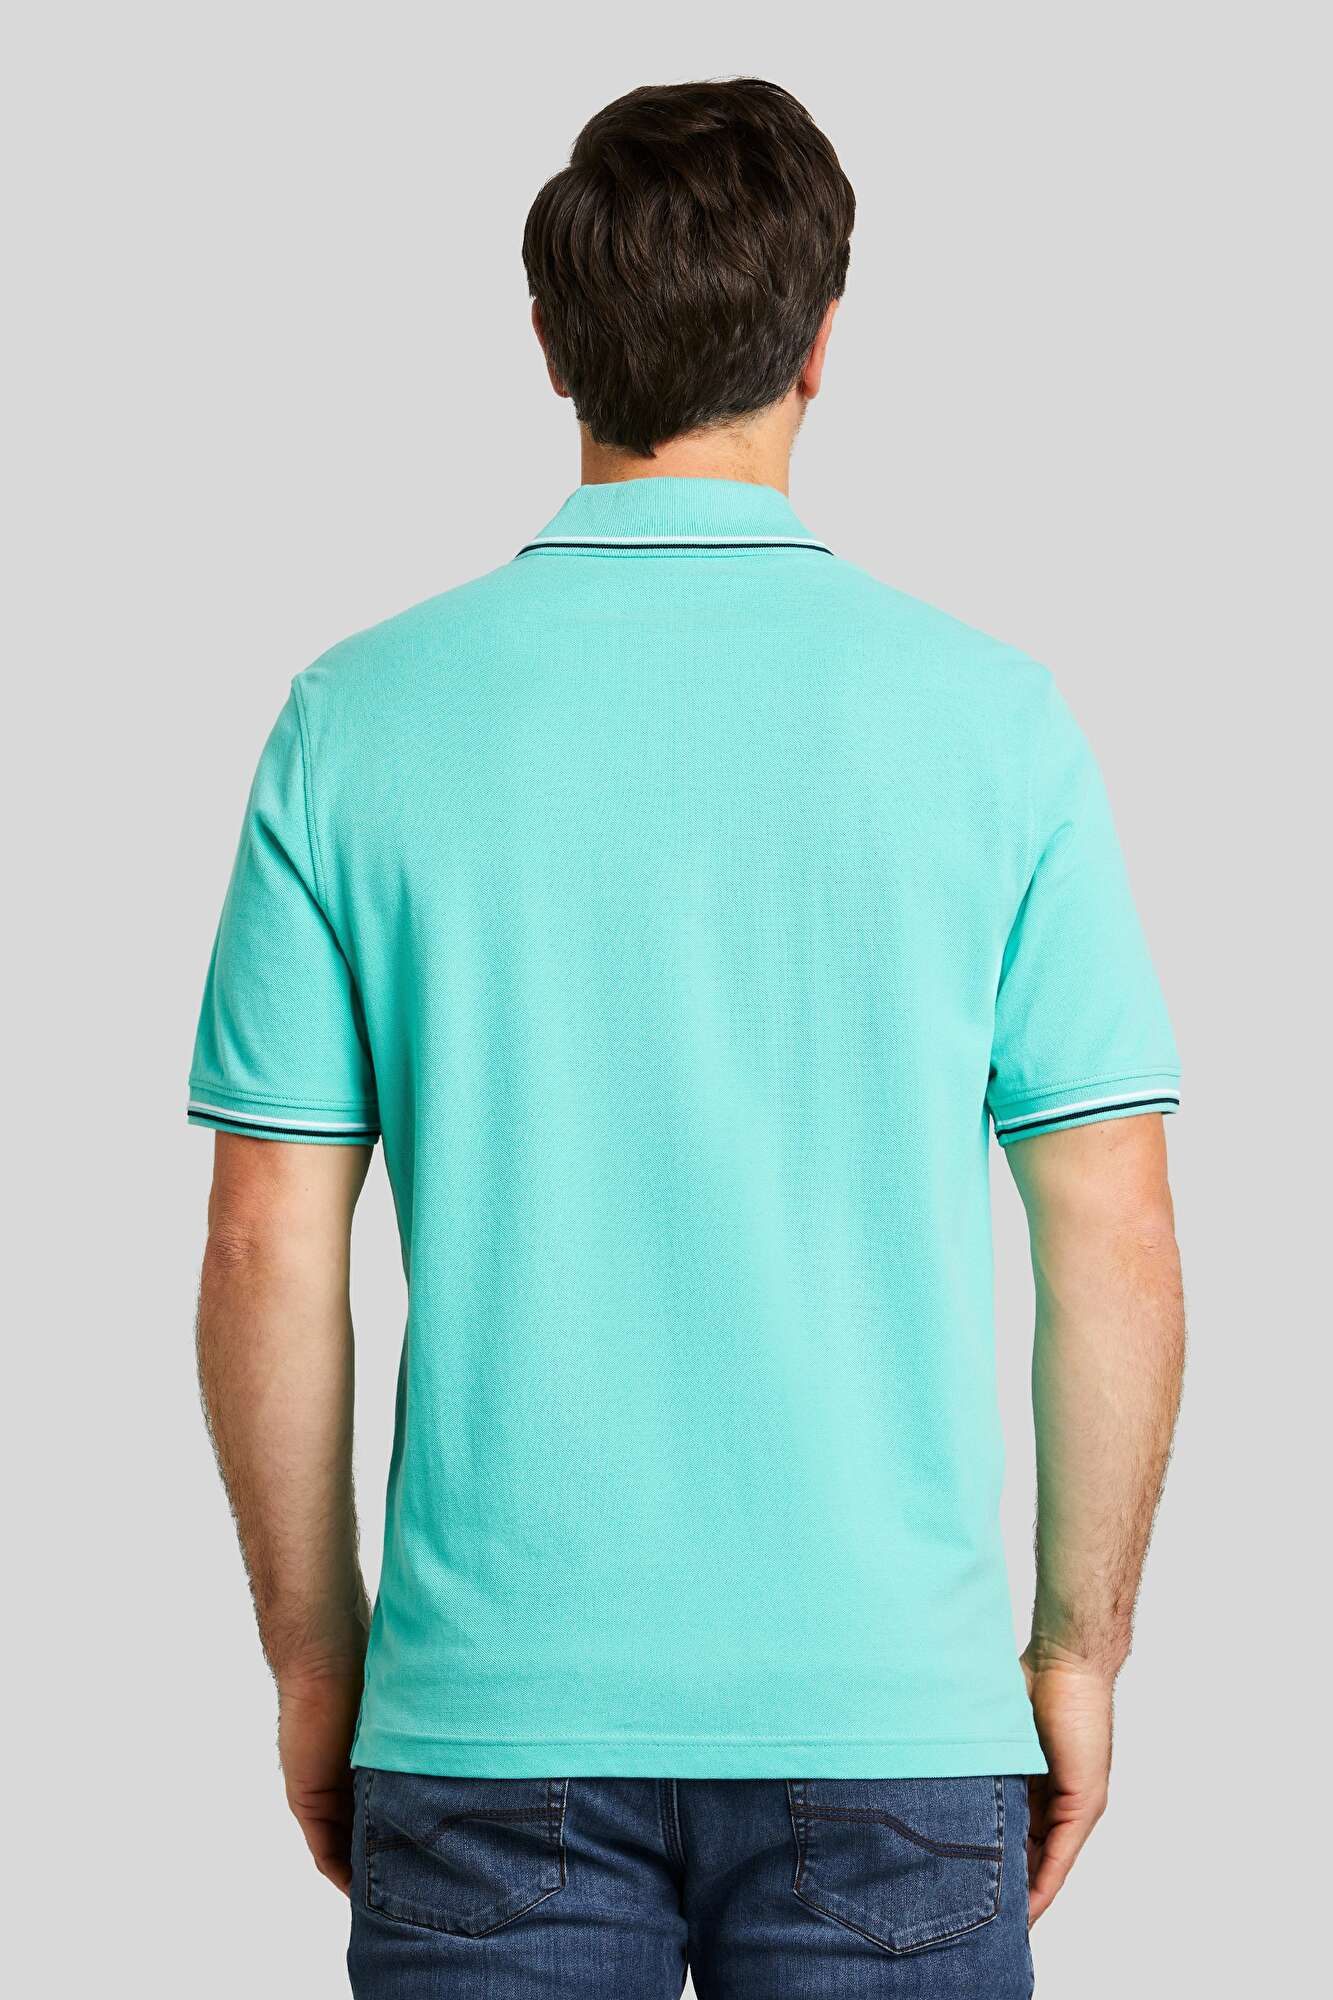 Pique polo shirt the | in and collar sleeve mint stripes bugatti with contrasting on cuffs